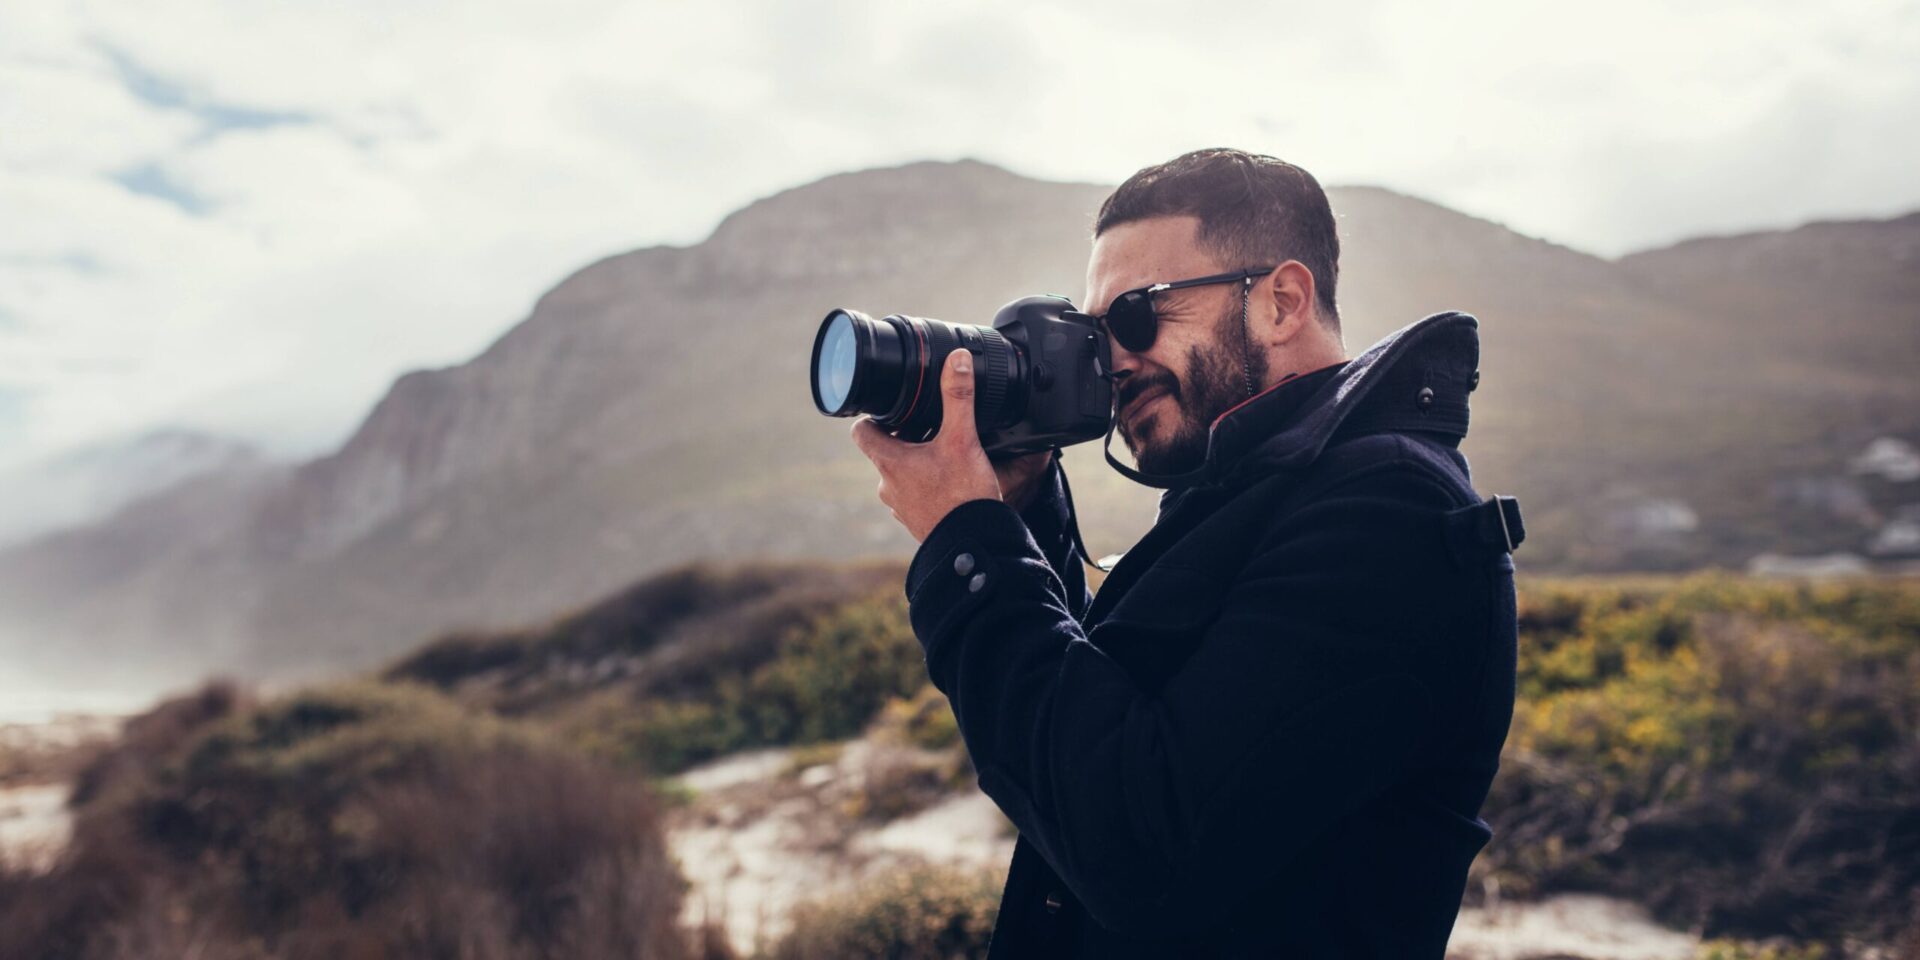 How to Start a Photography Business in 11 Steps